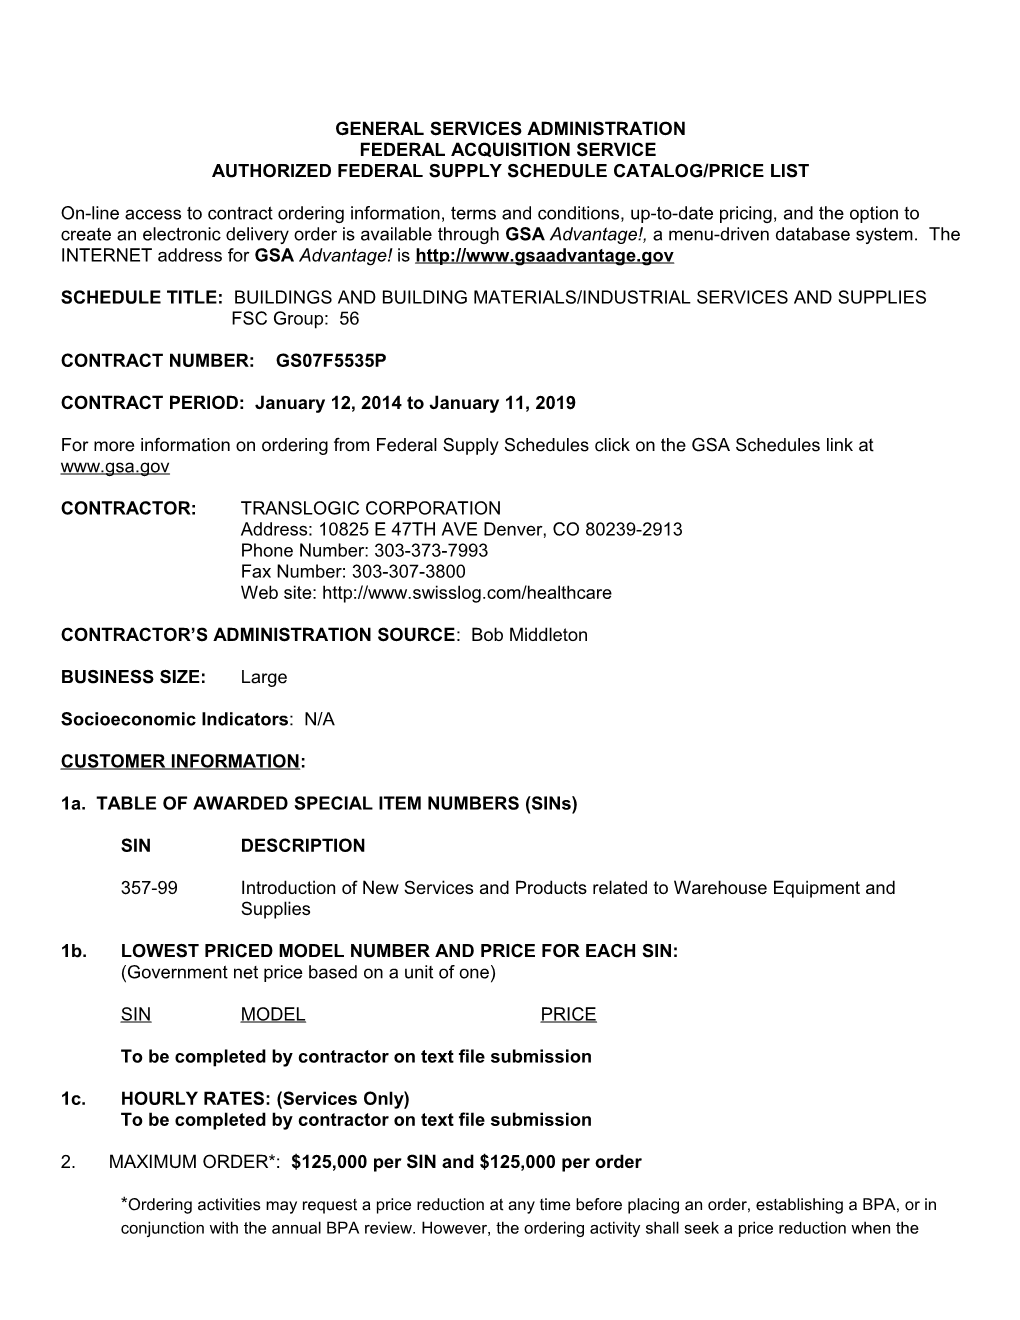 Standard Form 1449, Contract for Commercial Items (Cont D) Page 1A s9